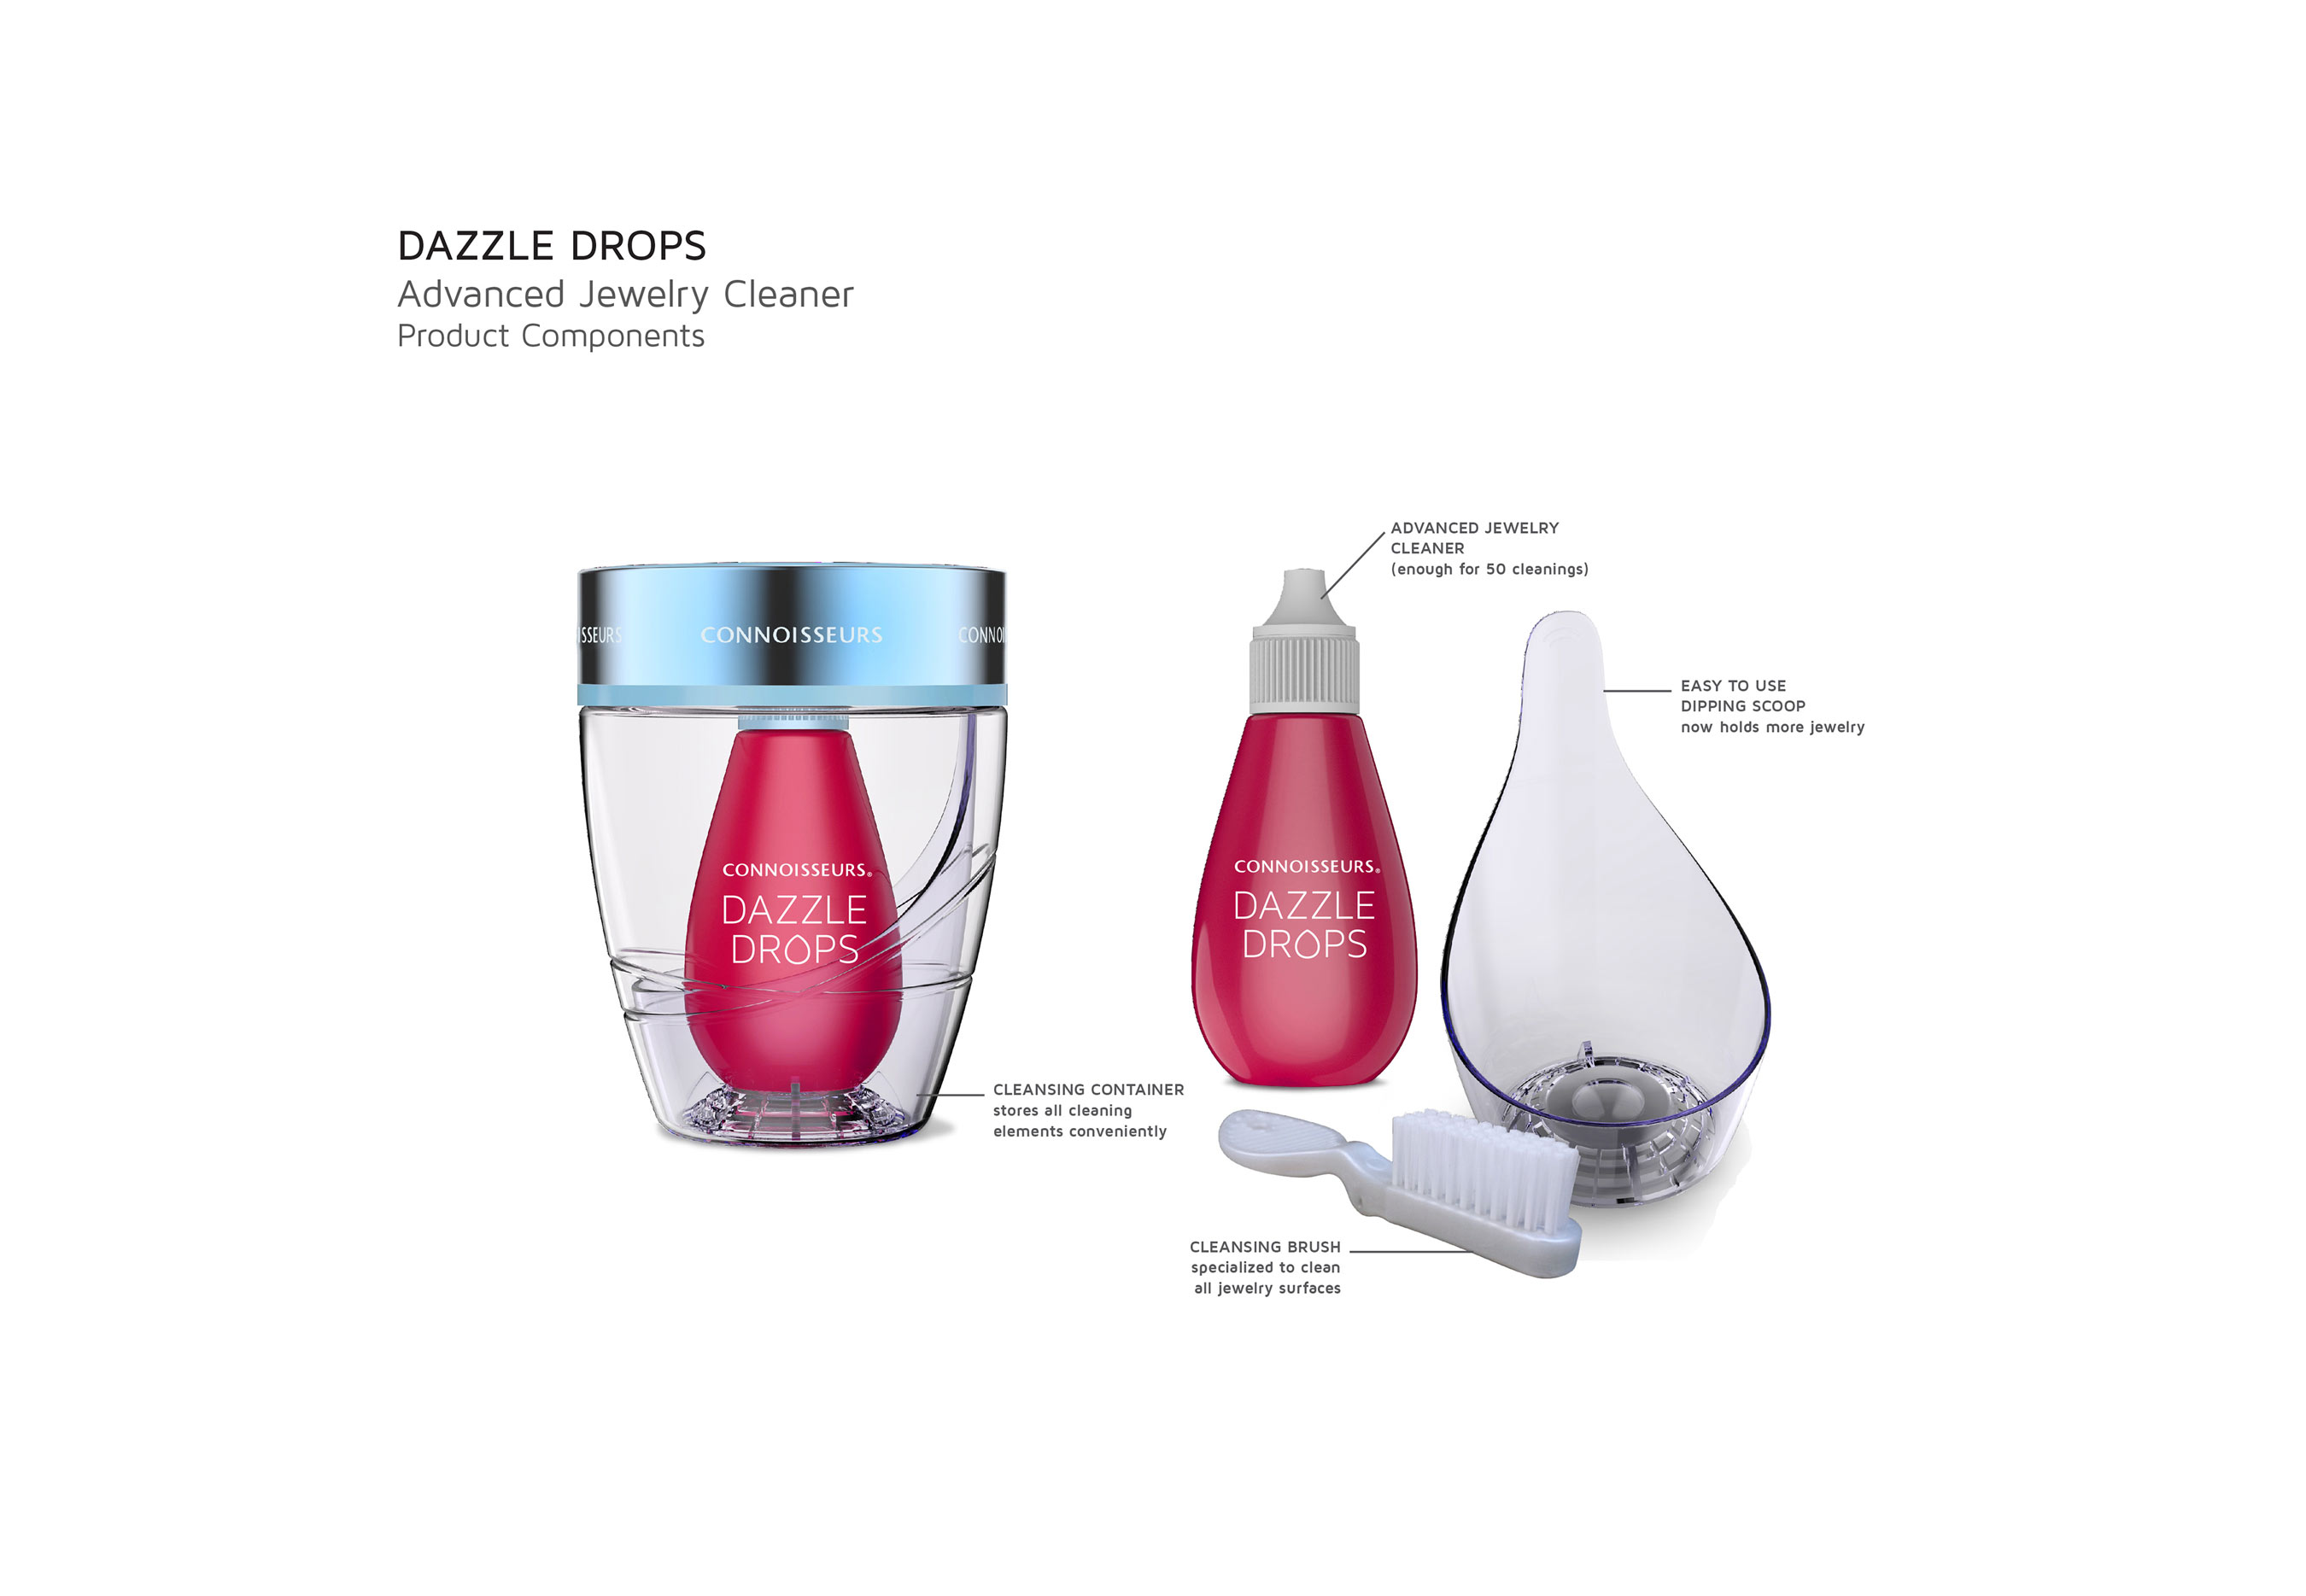 Connoisseurs Dazzle Drops™ Advanced Jewelry Cleaner Product Components